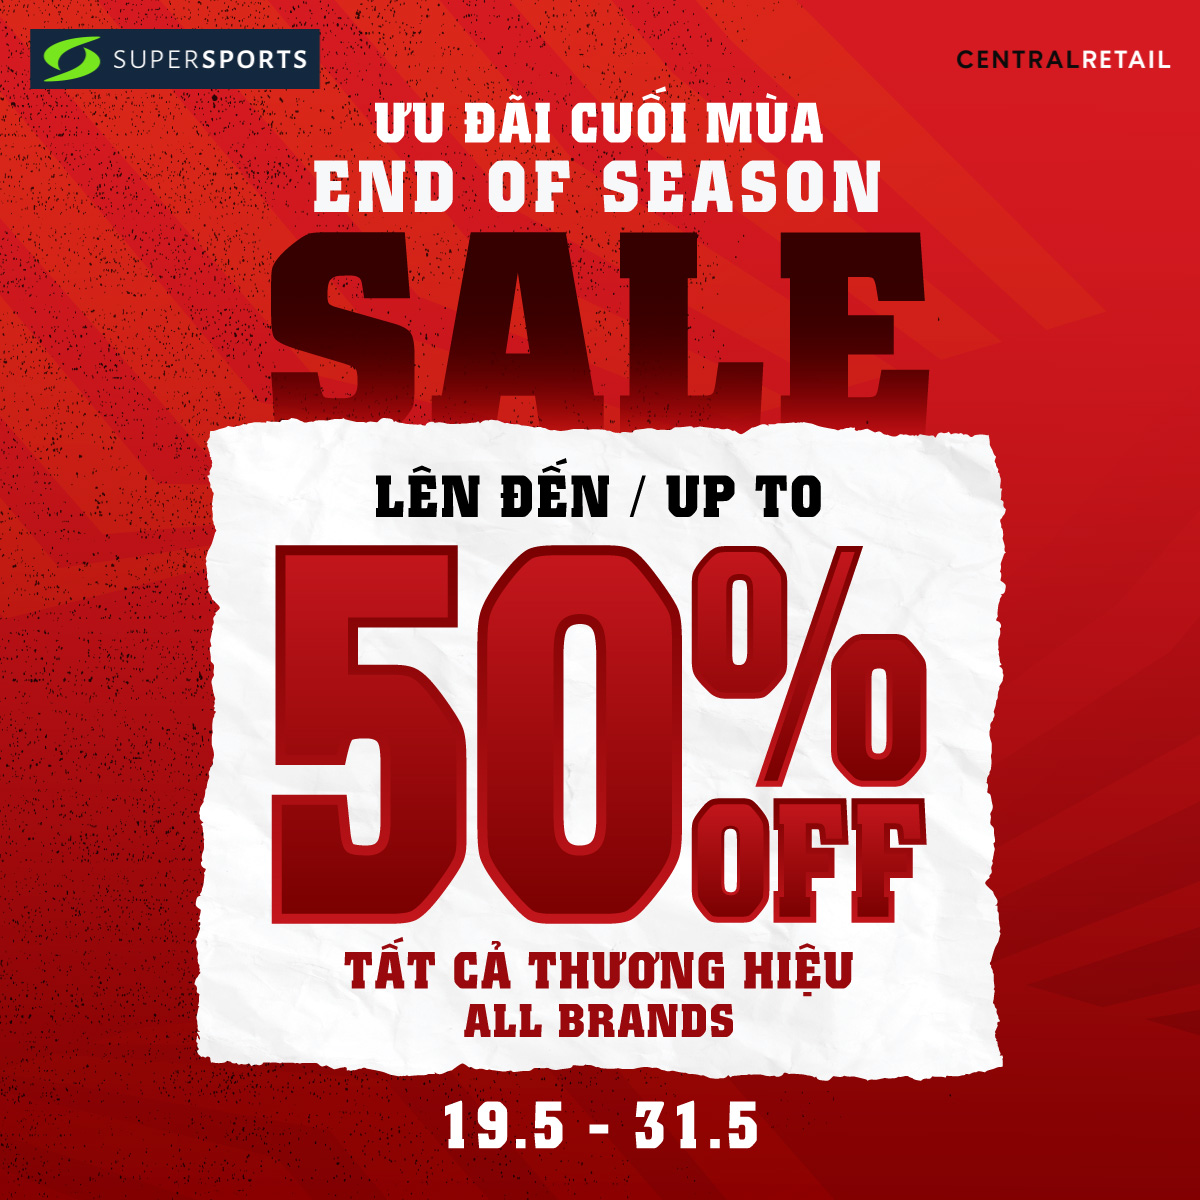 SUPER HOT DEAL - END OF SEASON SALE UP TO 50% at SUPERSPORTS